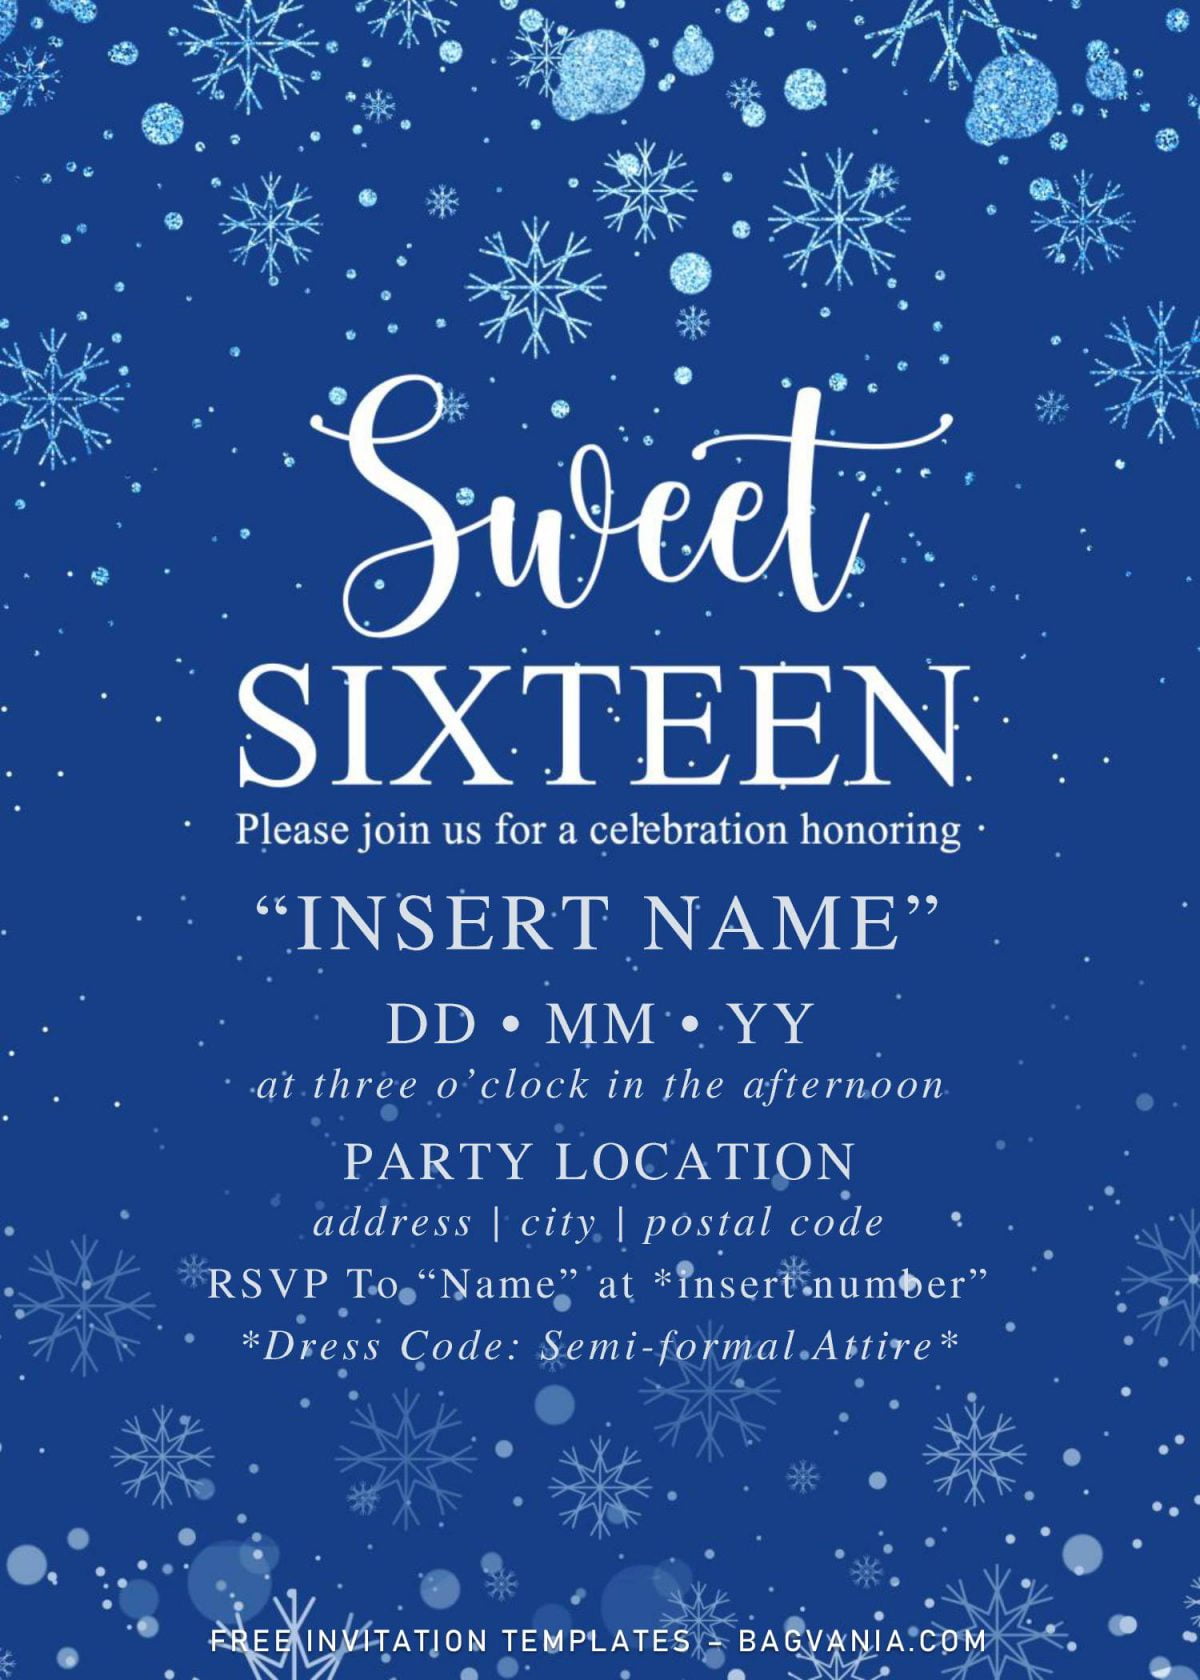 Free Winter Sweet Sixteen Birthday Invitation Templates For Word and has portrait design